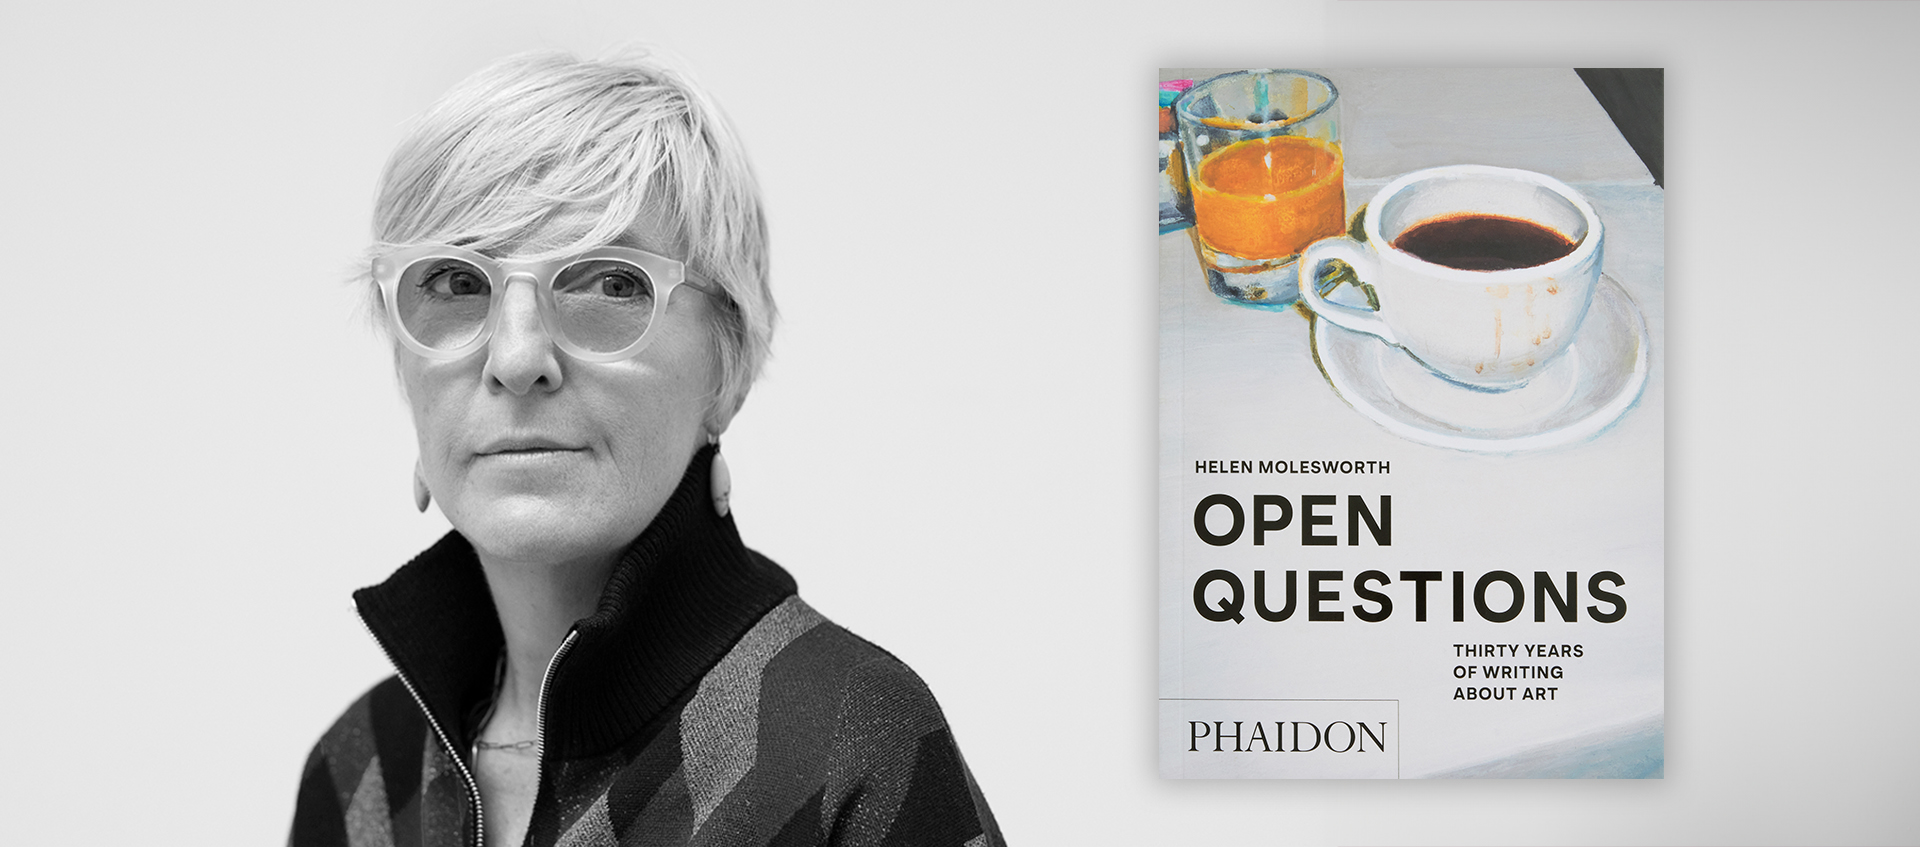 Collage of a headshot of Helen Molesworth with an image of the cover of her book, which features a painting of a glass of orange juice and cup of coffee.